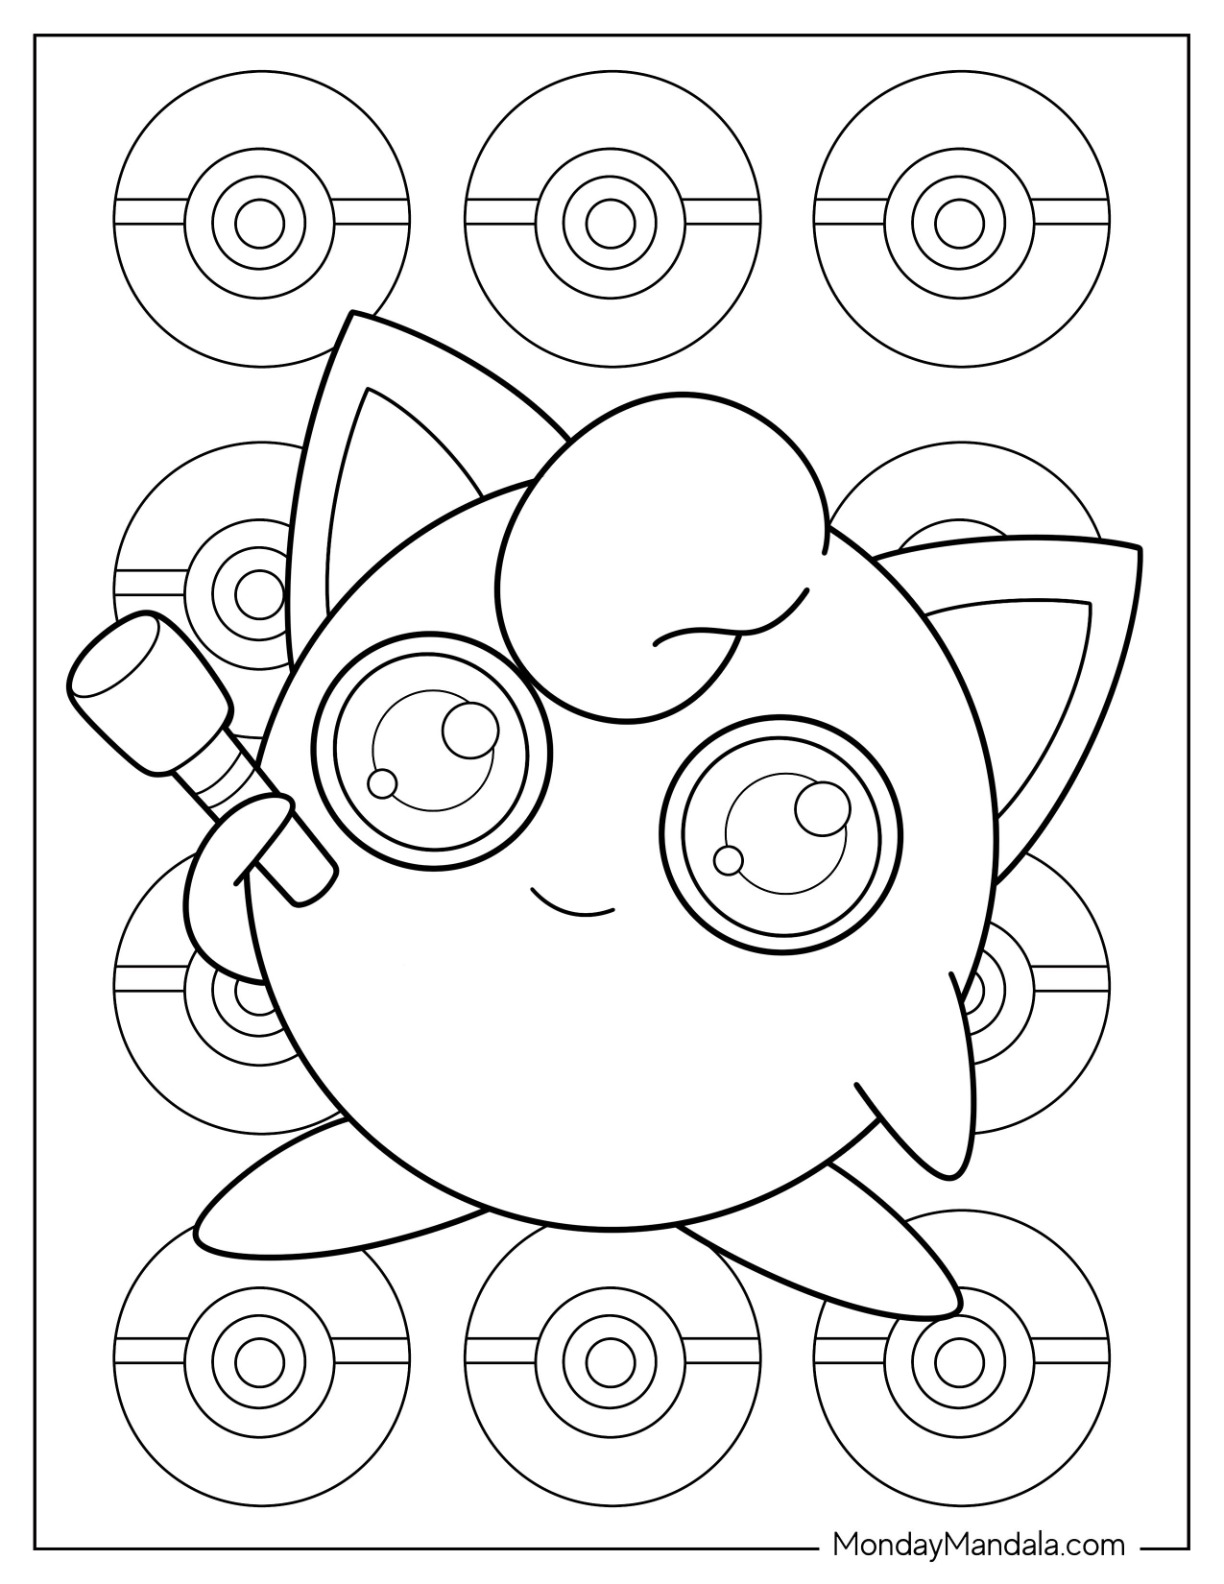 Jigglypuff coloring pages free pdf printables